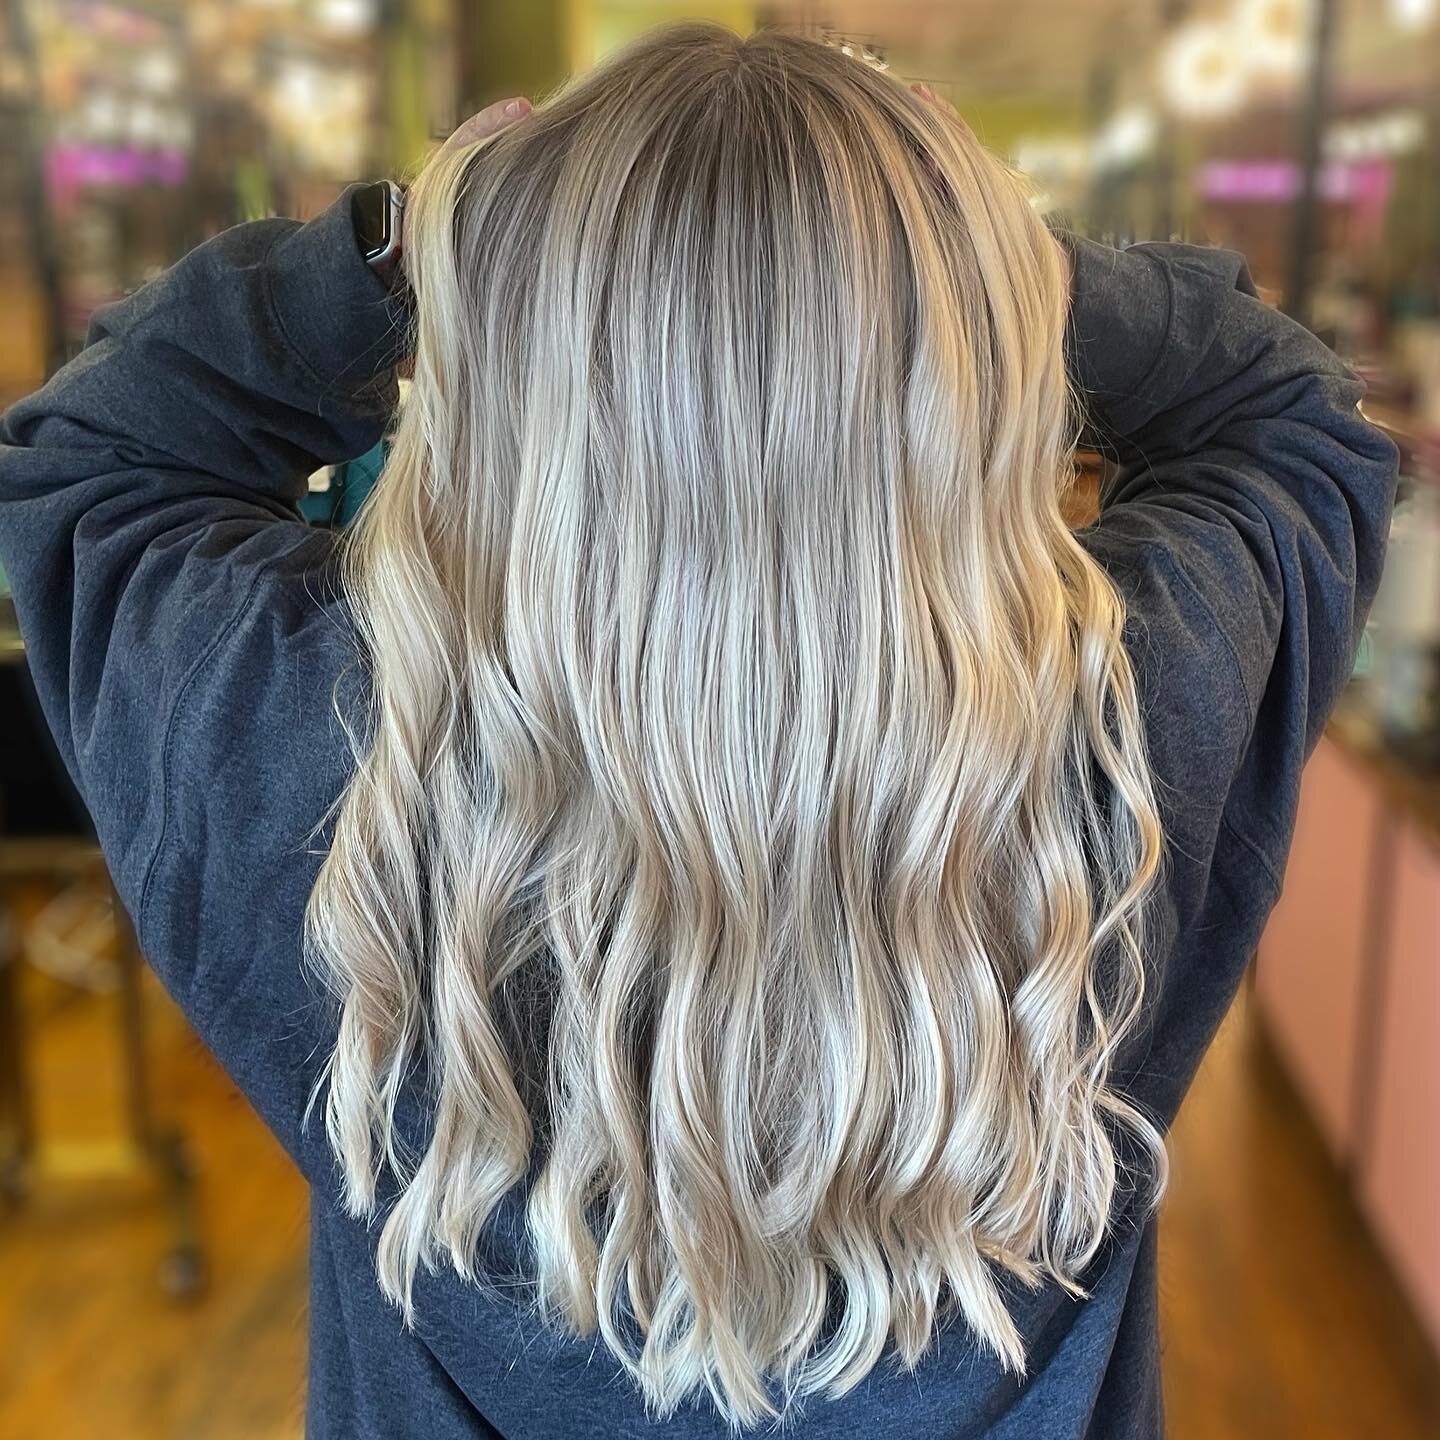 Tired of of highlighting your hair but still want to be a blonde? Reverse balayage is for you! Extending your root will help keep the grow out soft and make your blonde feel brighter 🤩

#lexingtonky #sharethelex #lexingtonstylist #blondehair #blonde